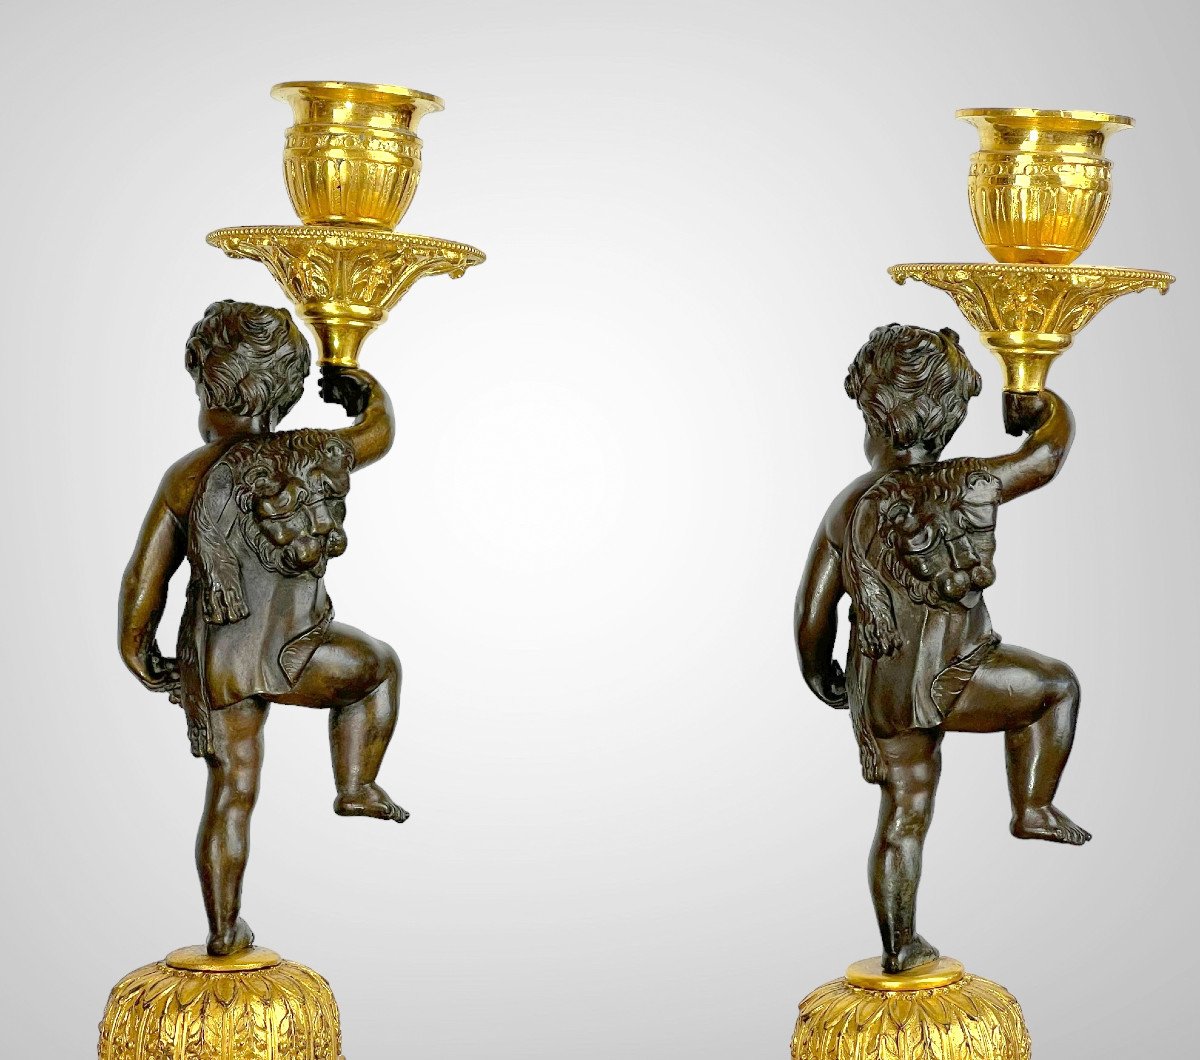 Pair Of Bronze Candelabras With Brown And Golden Patina With Cherb Decor From The 19th C.-photo-2